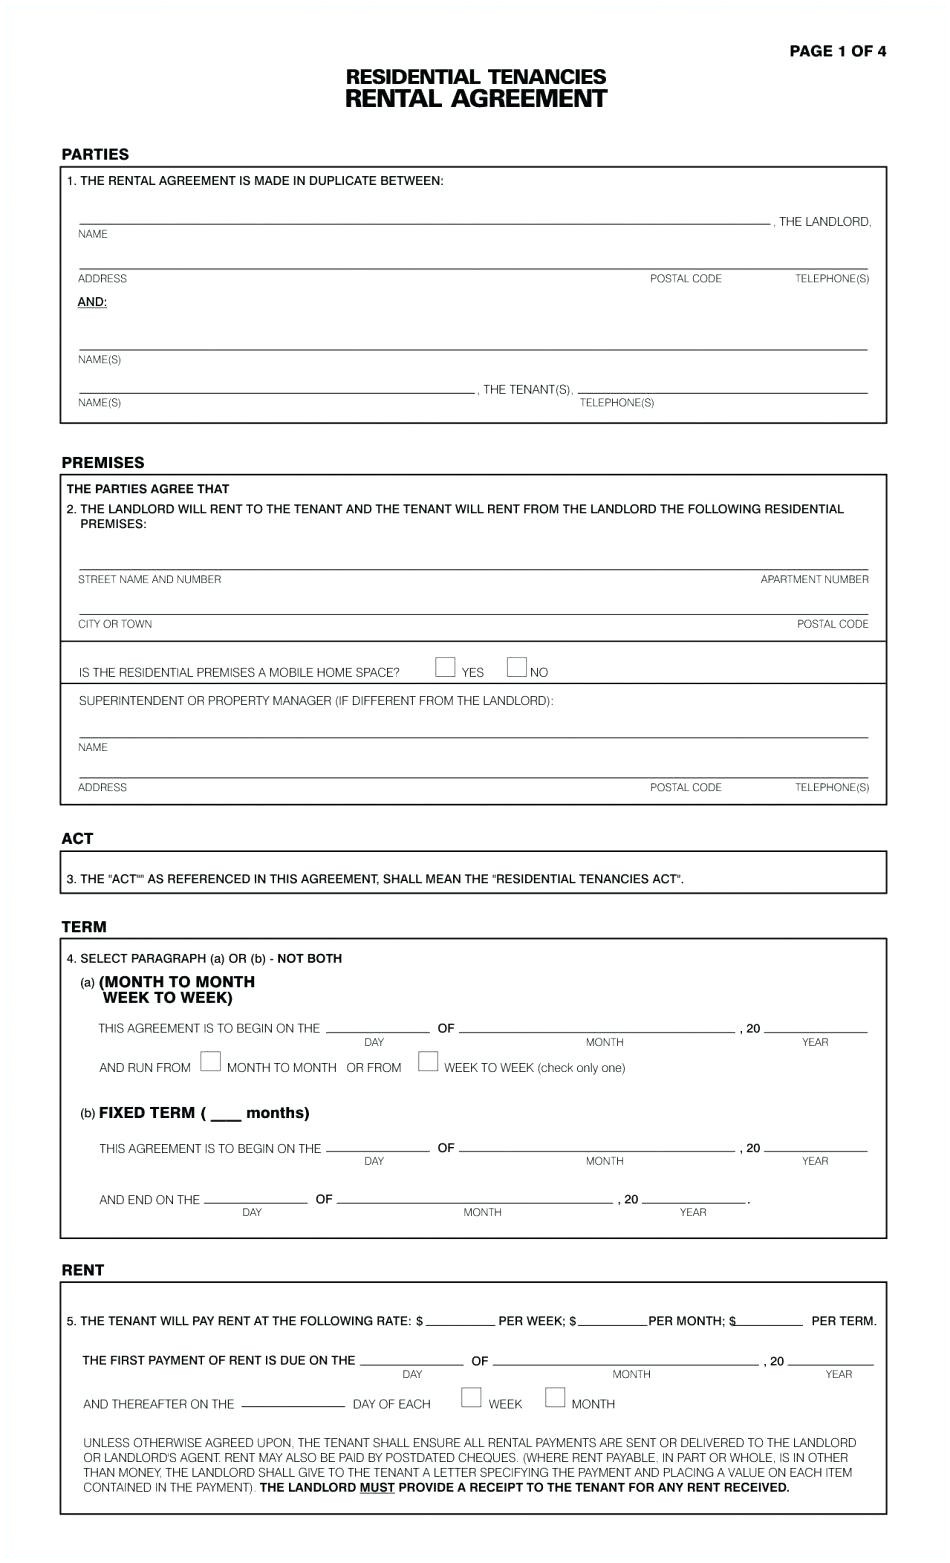 Free Template Lease Agreement 009 Rental Agreements Templates Free Lease Agreement Forms Form